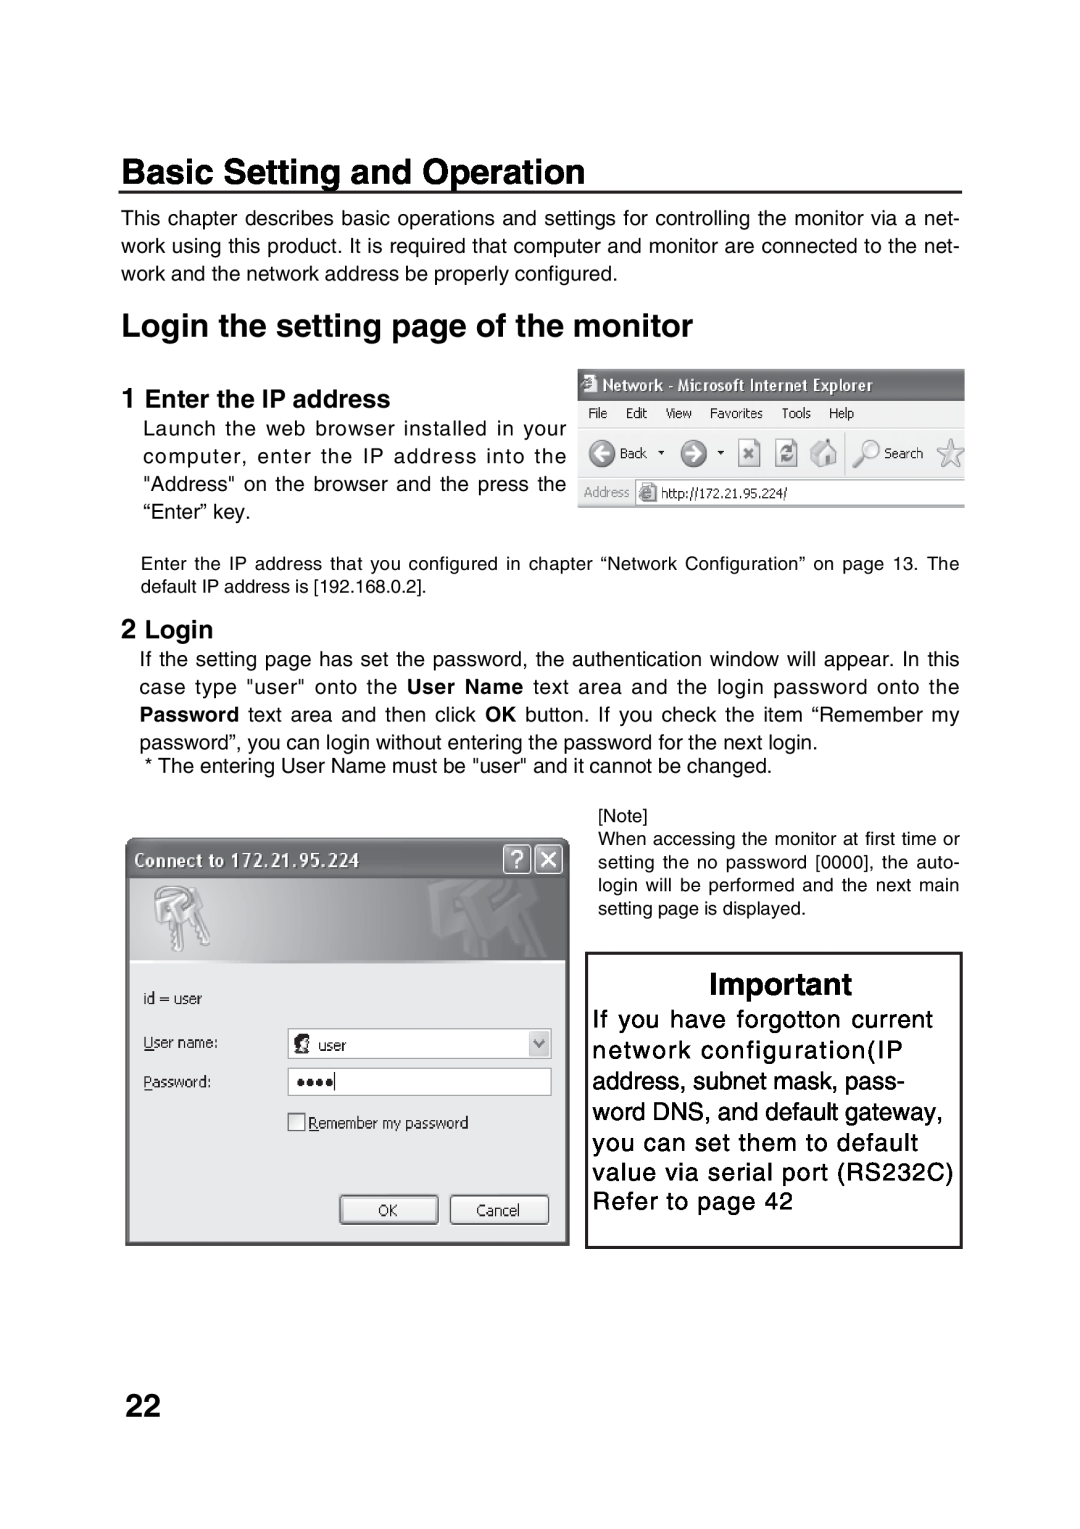 Sanyo POA-LN01 appendix Basic Setting and Operation, Login the setting page of the monitor, Enter the IP address 